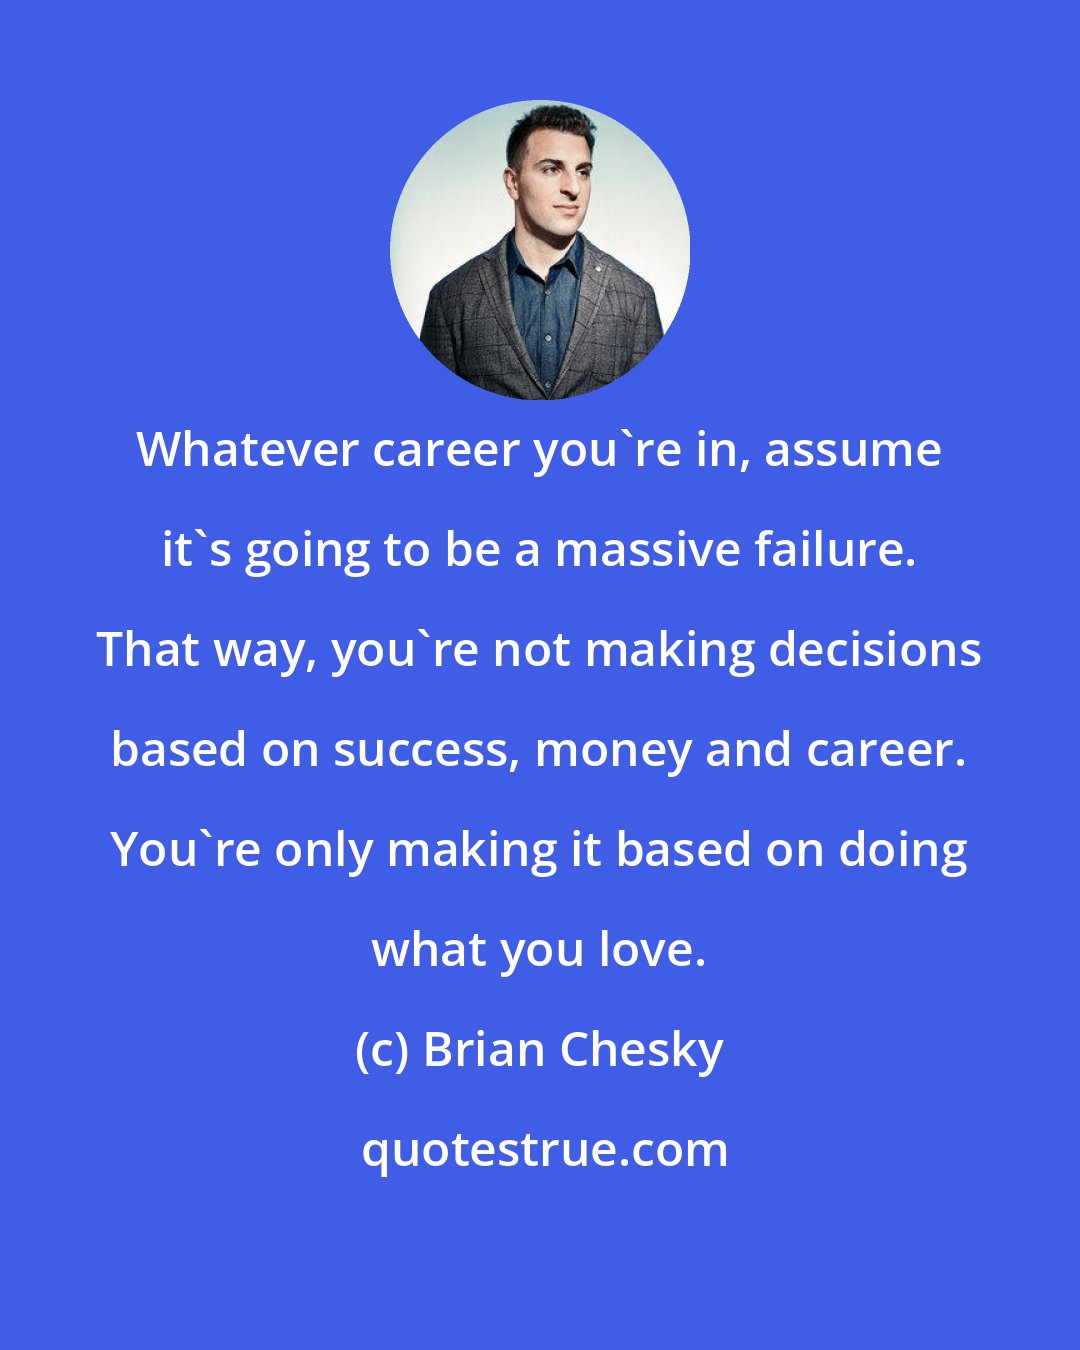 Brian Chesky: Whatever career you're in, assume it's going to be a massive failure. That way, you're not making decisions based on success, money and career. You're only making it based on doing what you love.